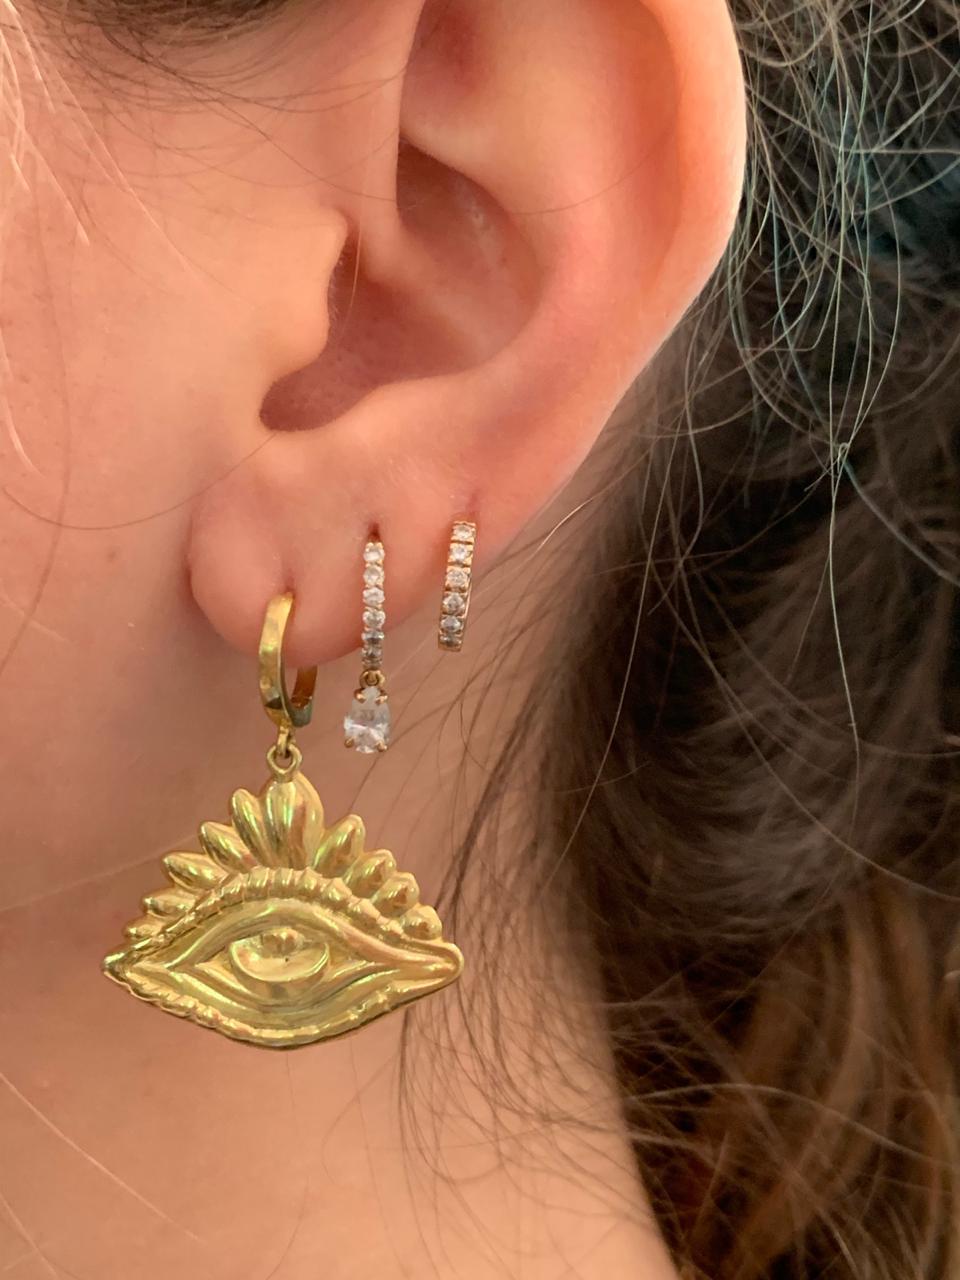 The Mati hoops are designed by Christina Alexiou.
This pair of hoop earrings is crafted with 18k yellow gold. As Christina Alexiou notes, she draws on jewellery's ancient purpose as 